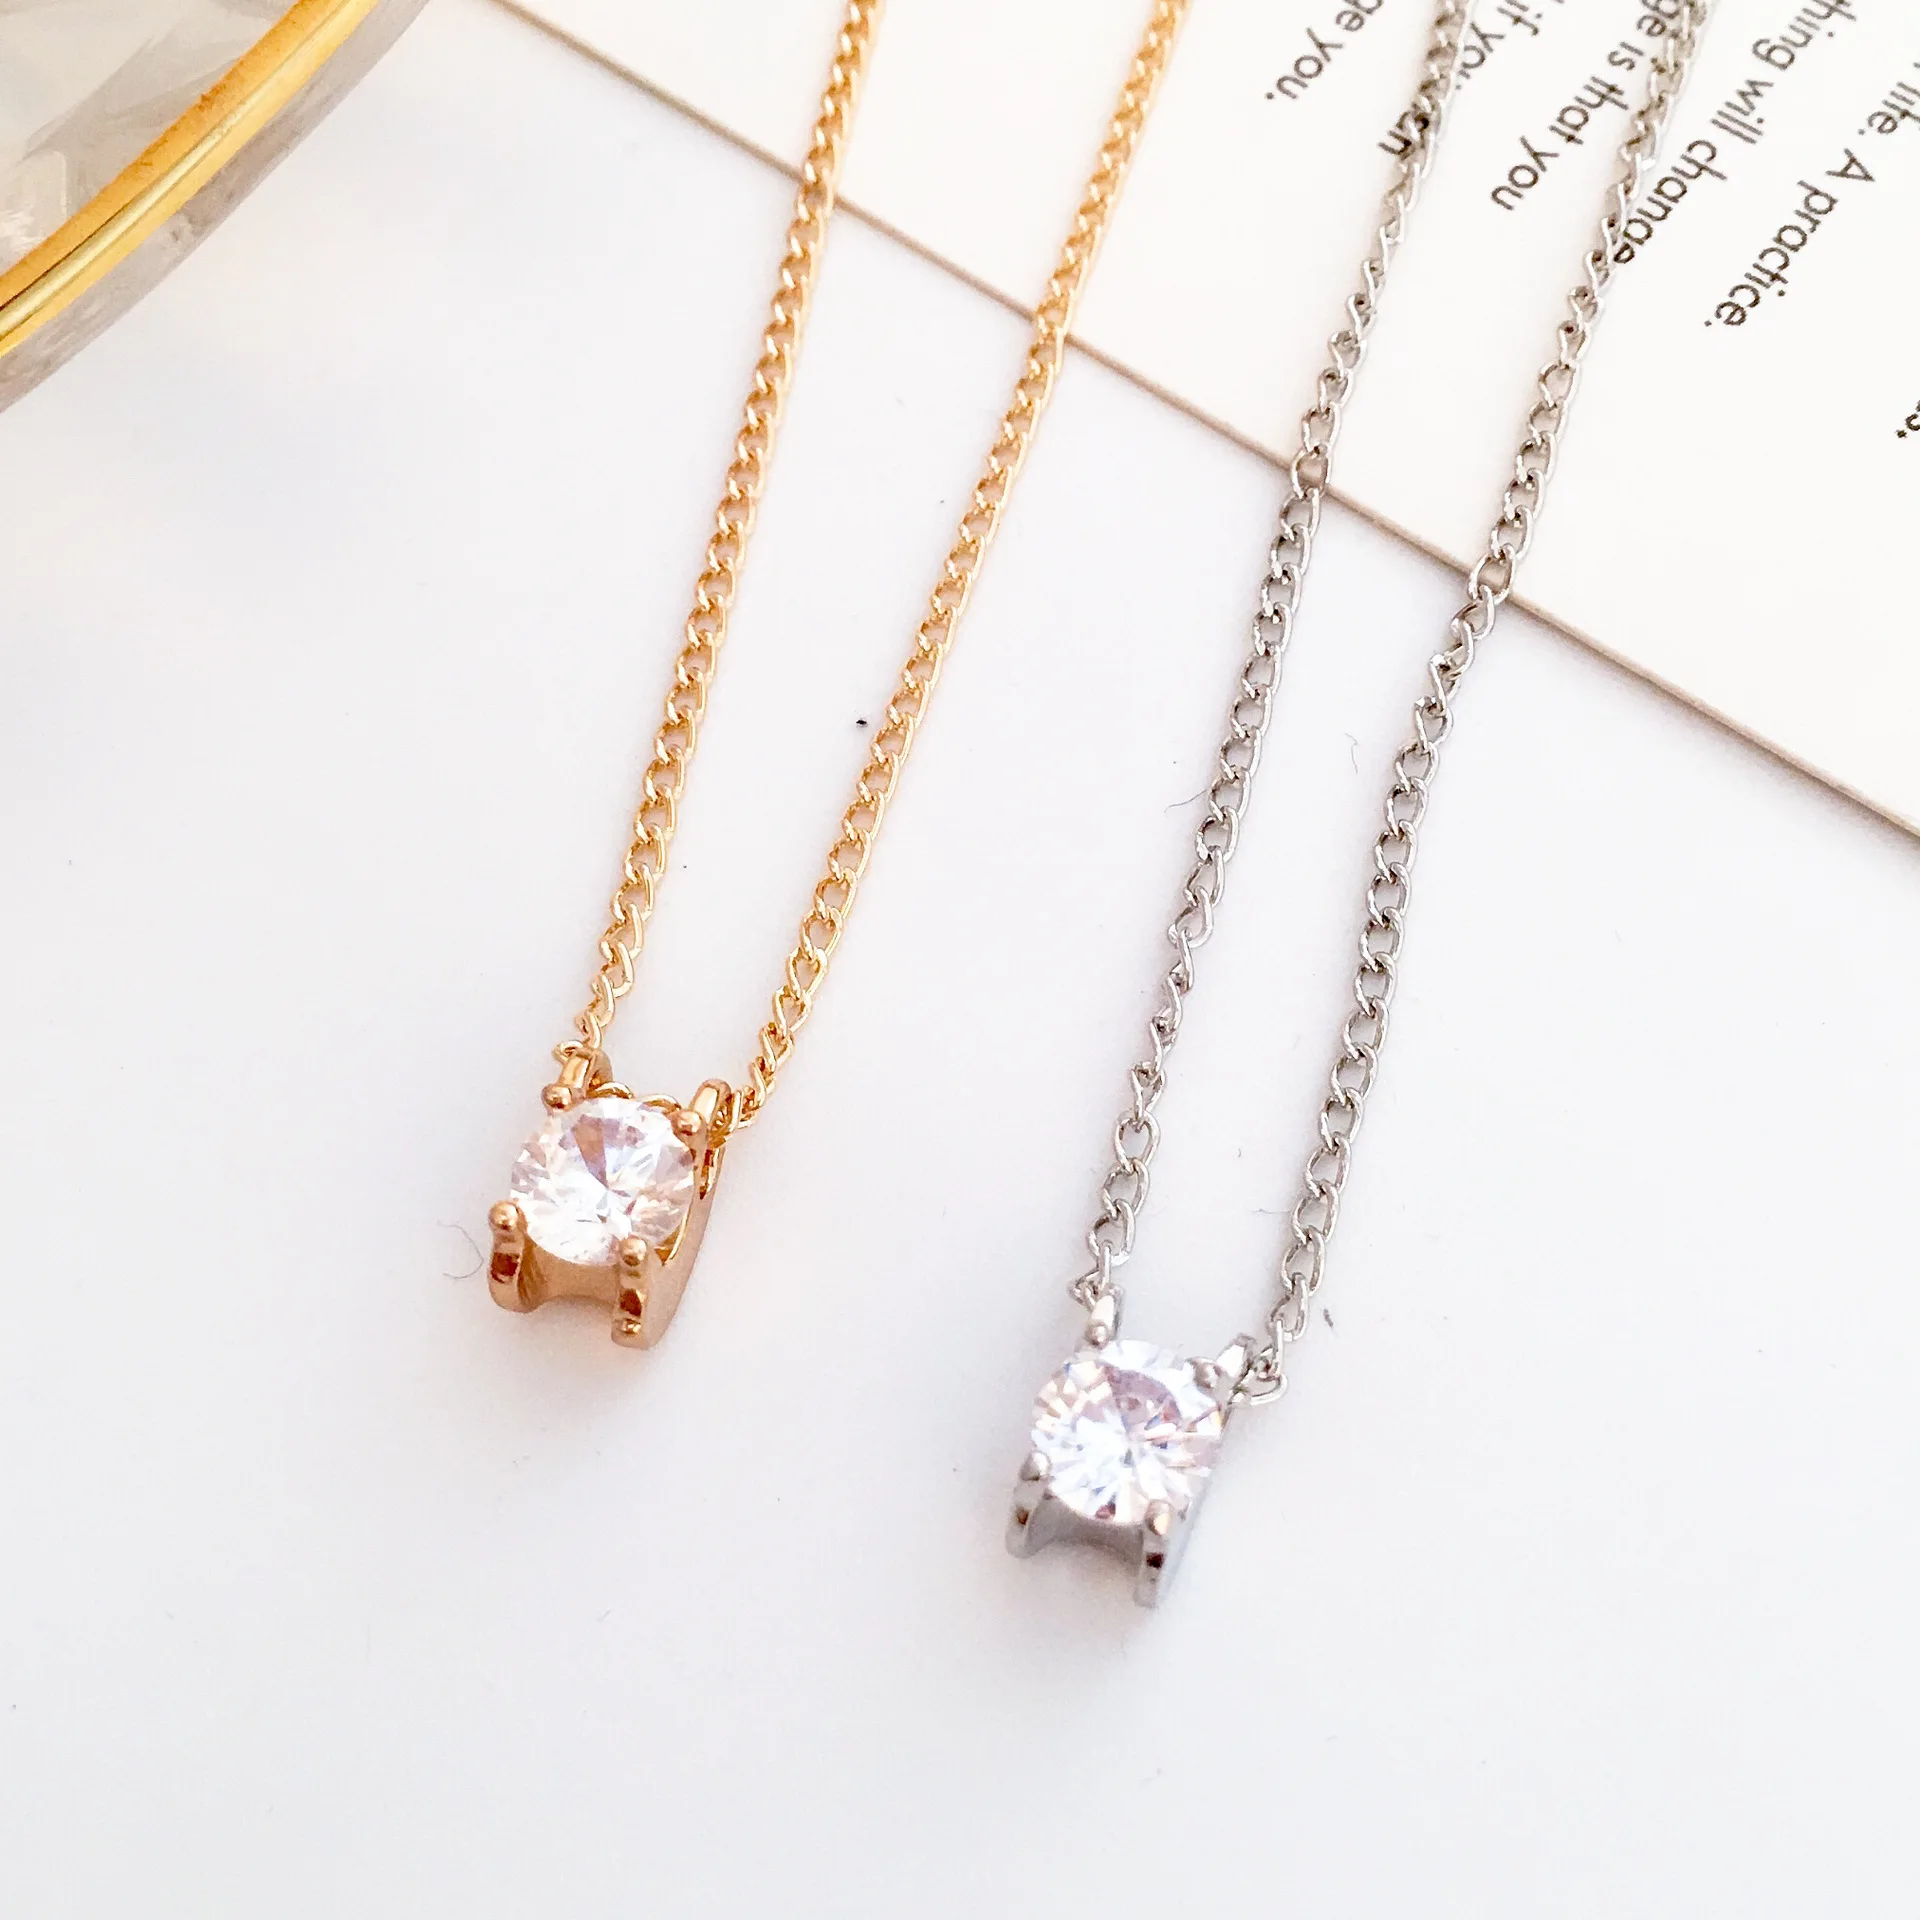 

NC-0222 Popular hot sale fashion dainty necklace newest trending simple zircon pendant necklace for women, Picture shows